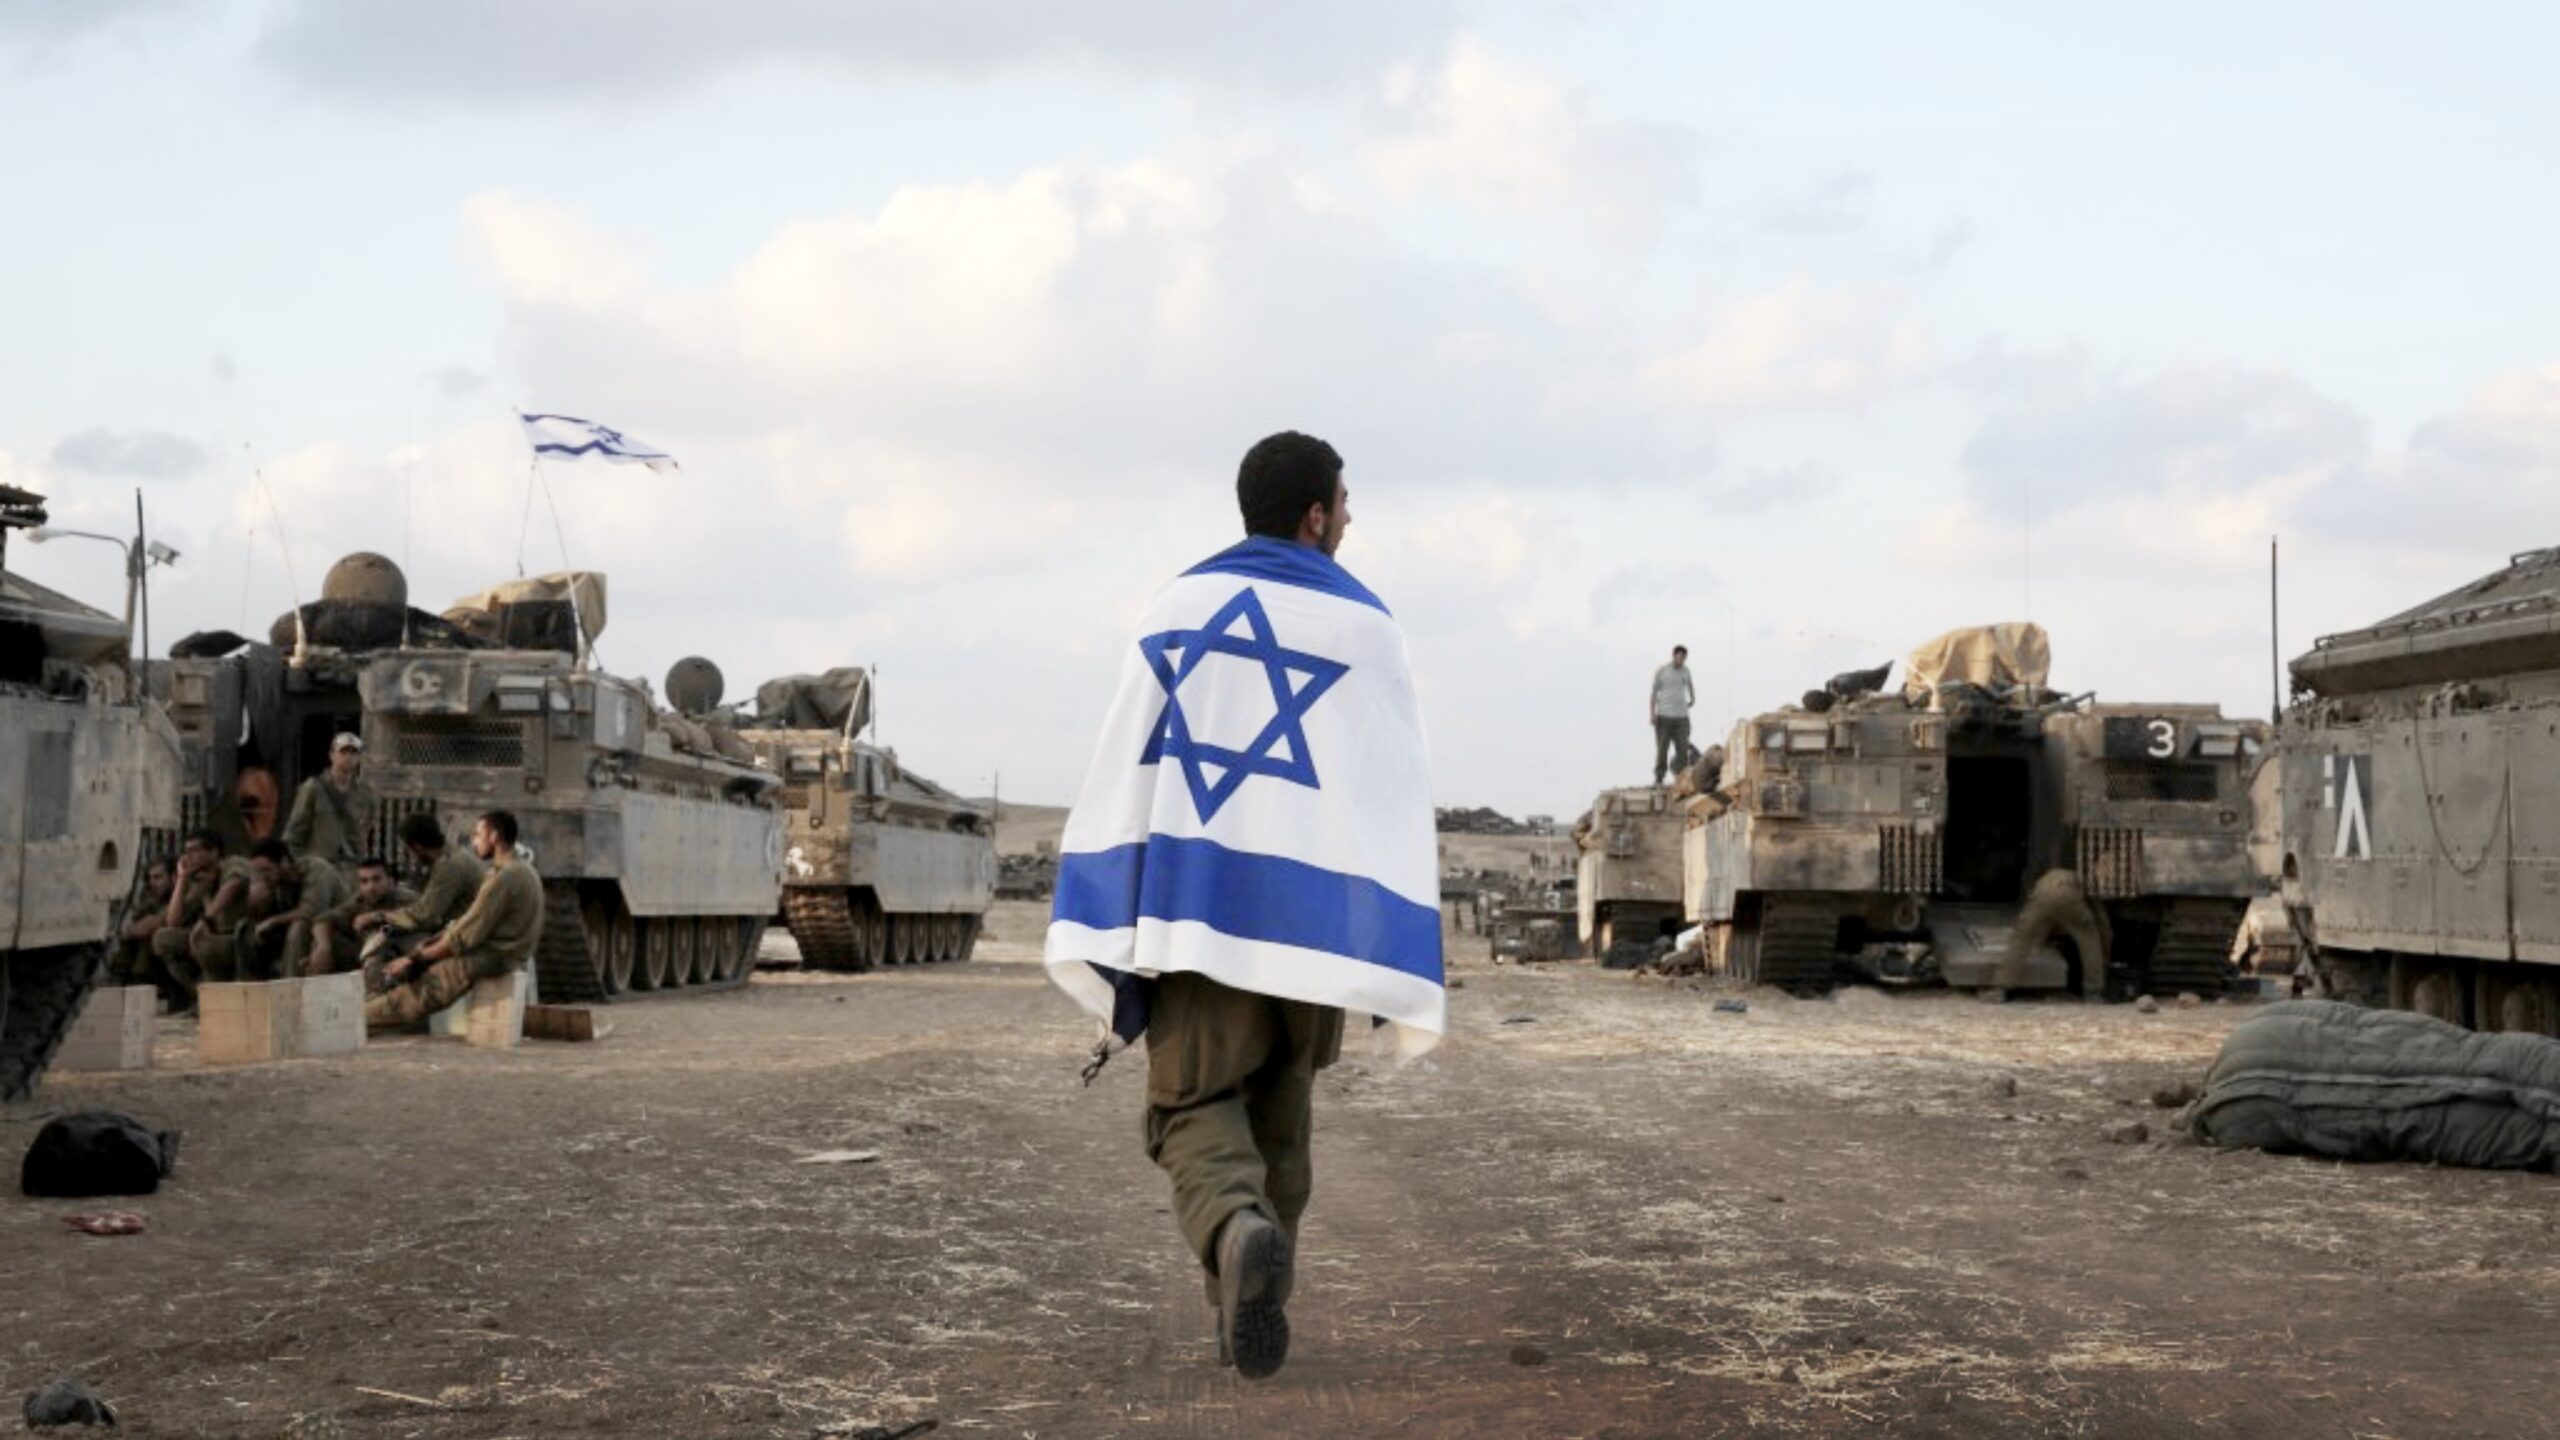 Amir Tsarfati: Ten Areas Where We Can See God’s Intervention Amid War In Israel - Harbingers Daily